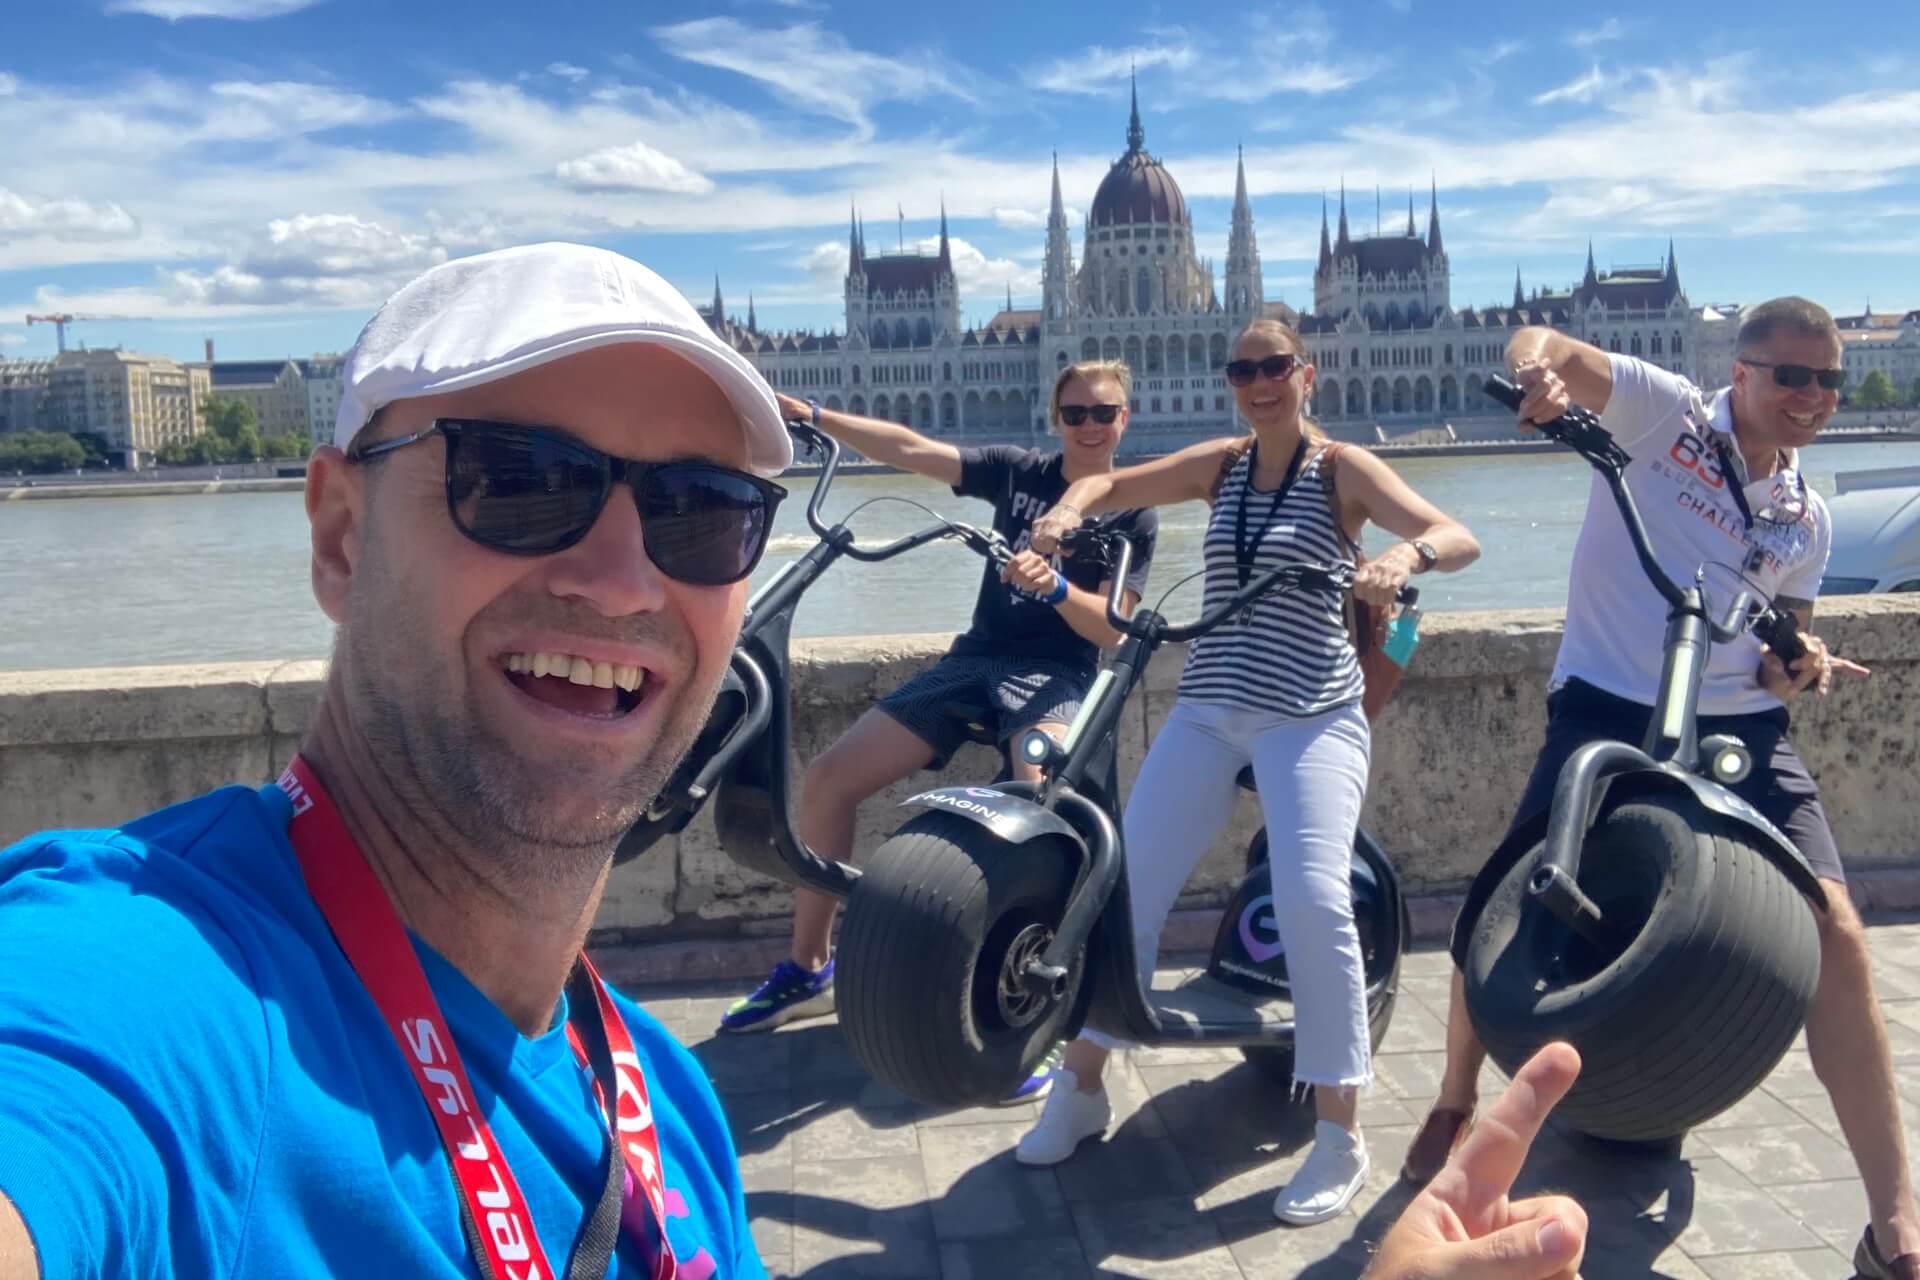 having fun on escooters with the budapest parliament across the danuber river in the background